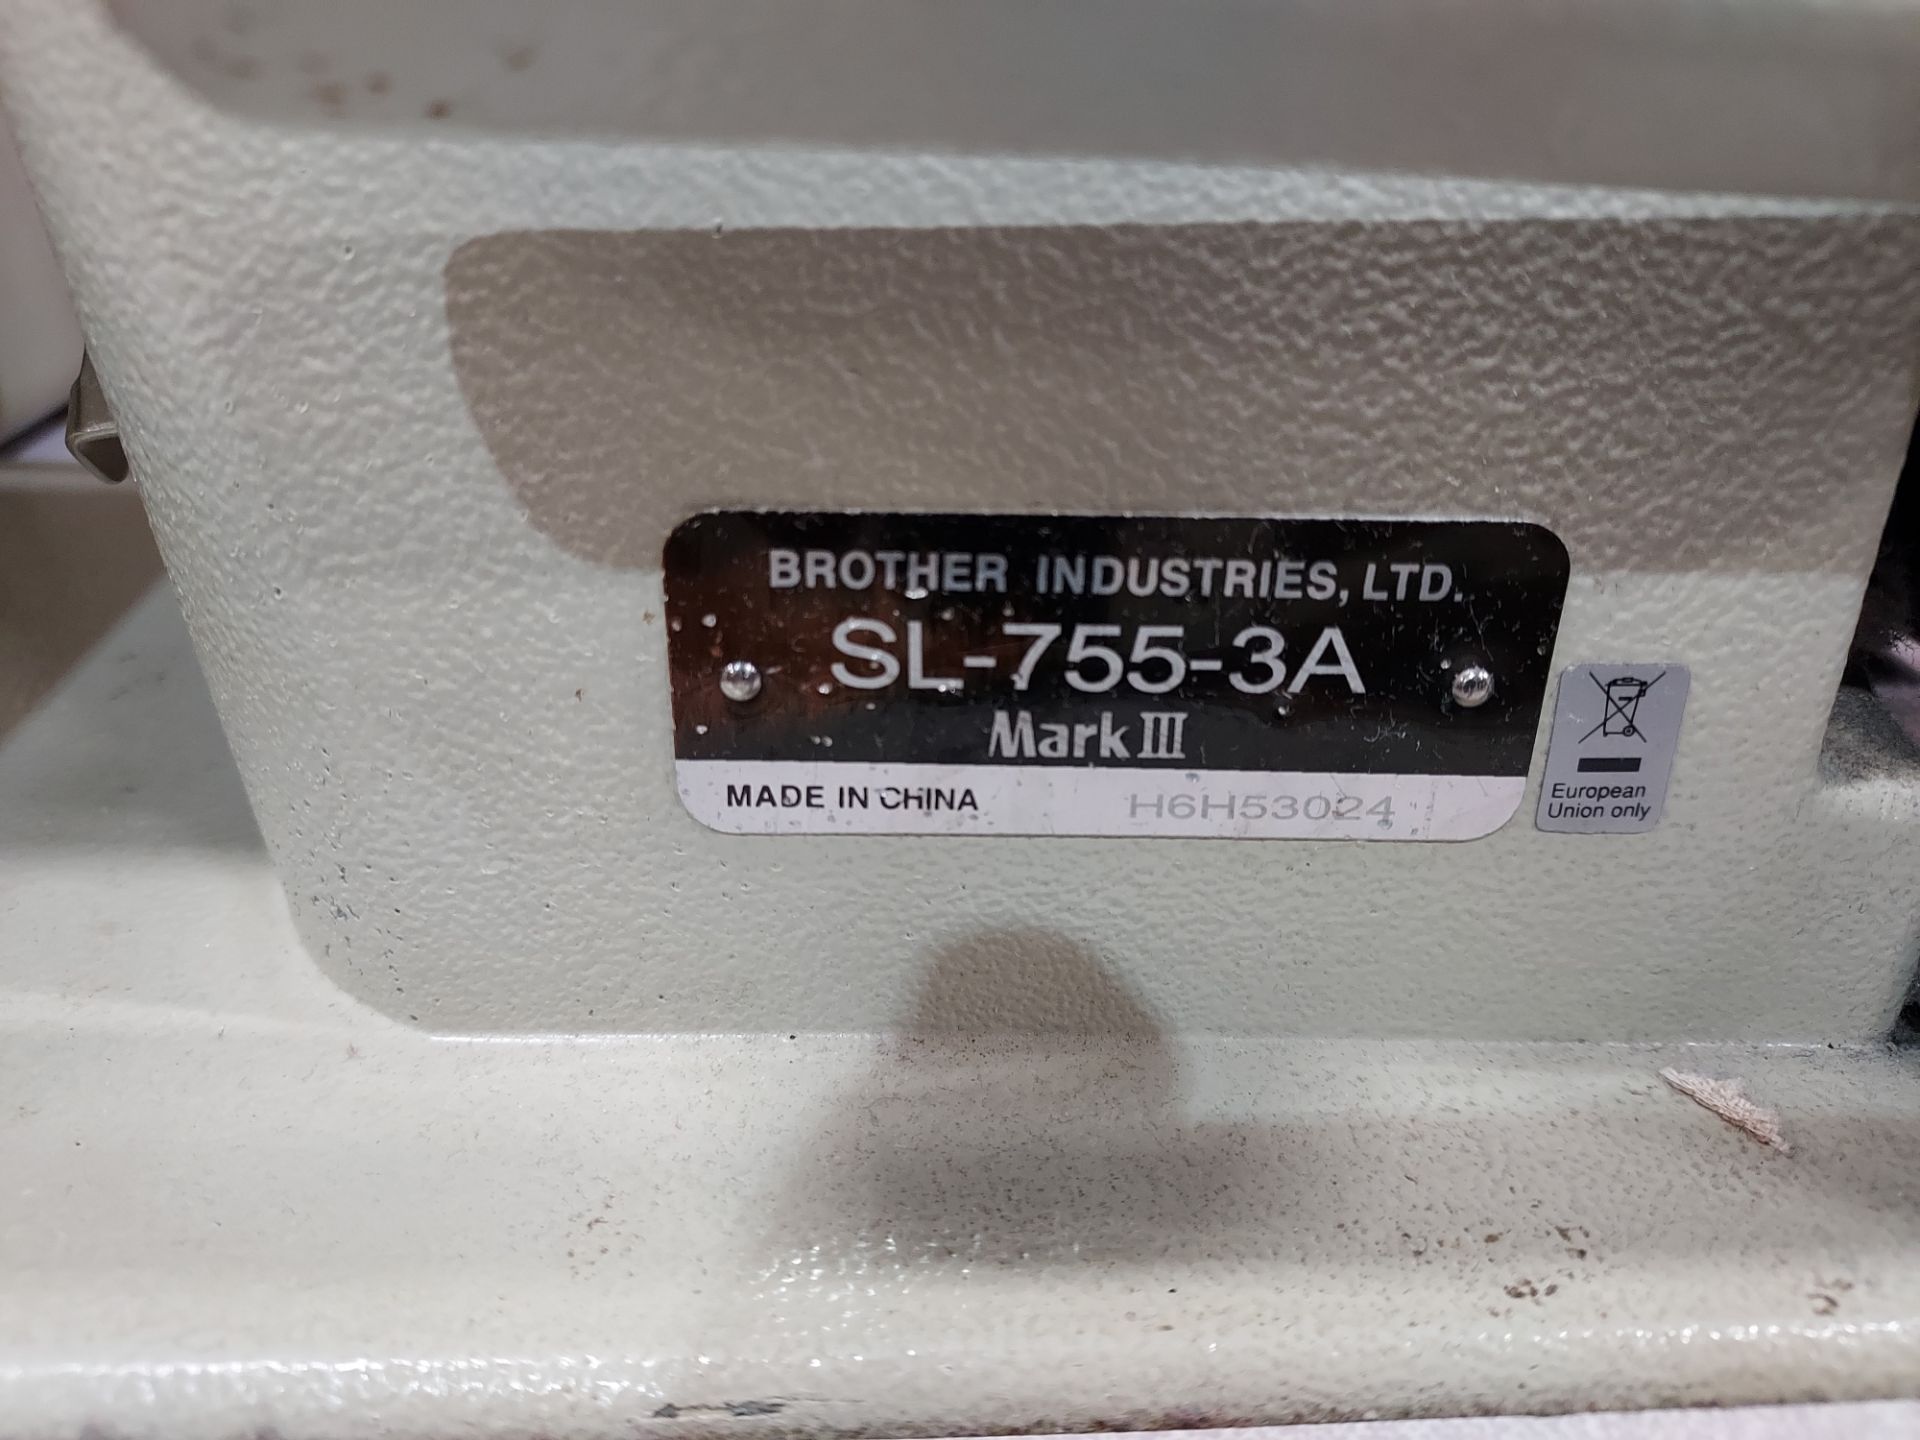 1 X BROTHER ( SL-755-3A MARK III ) LOCKSTITCH STRAIGHT STITCH INDUSTRIAL SEWING MACHINE - WITH - Image 2 of 2